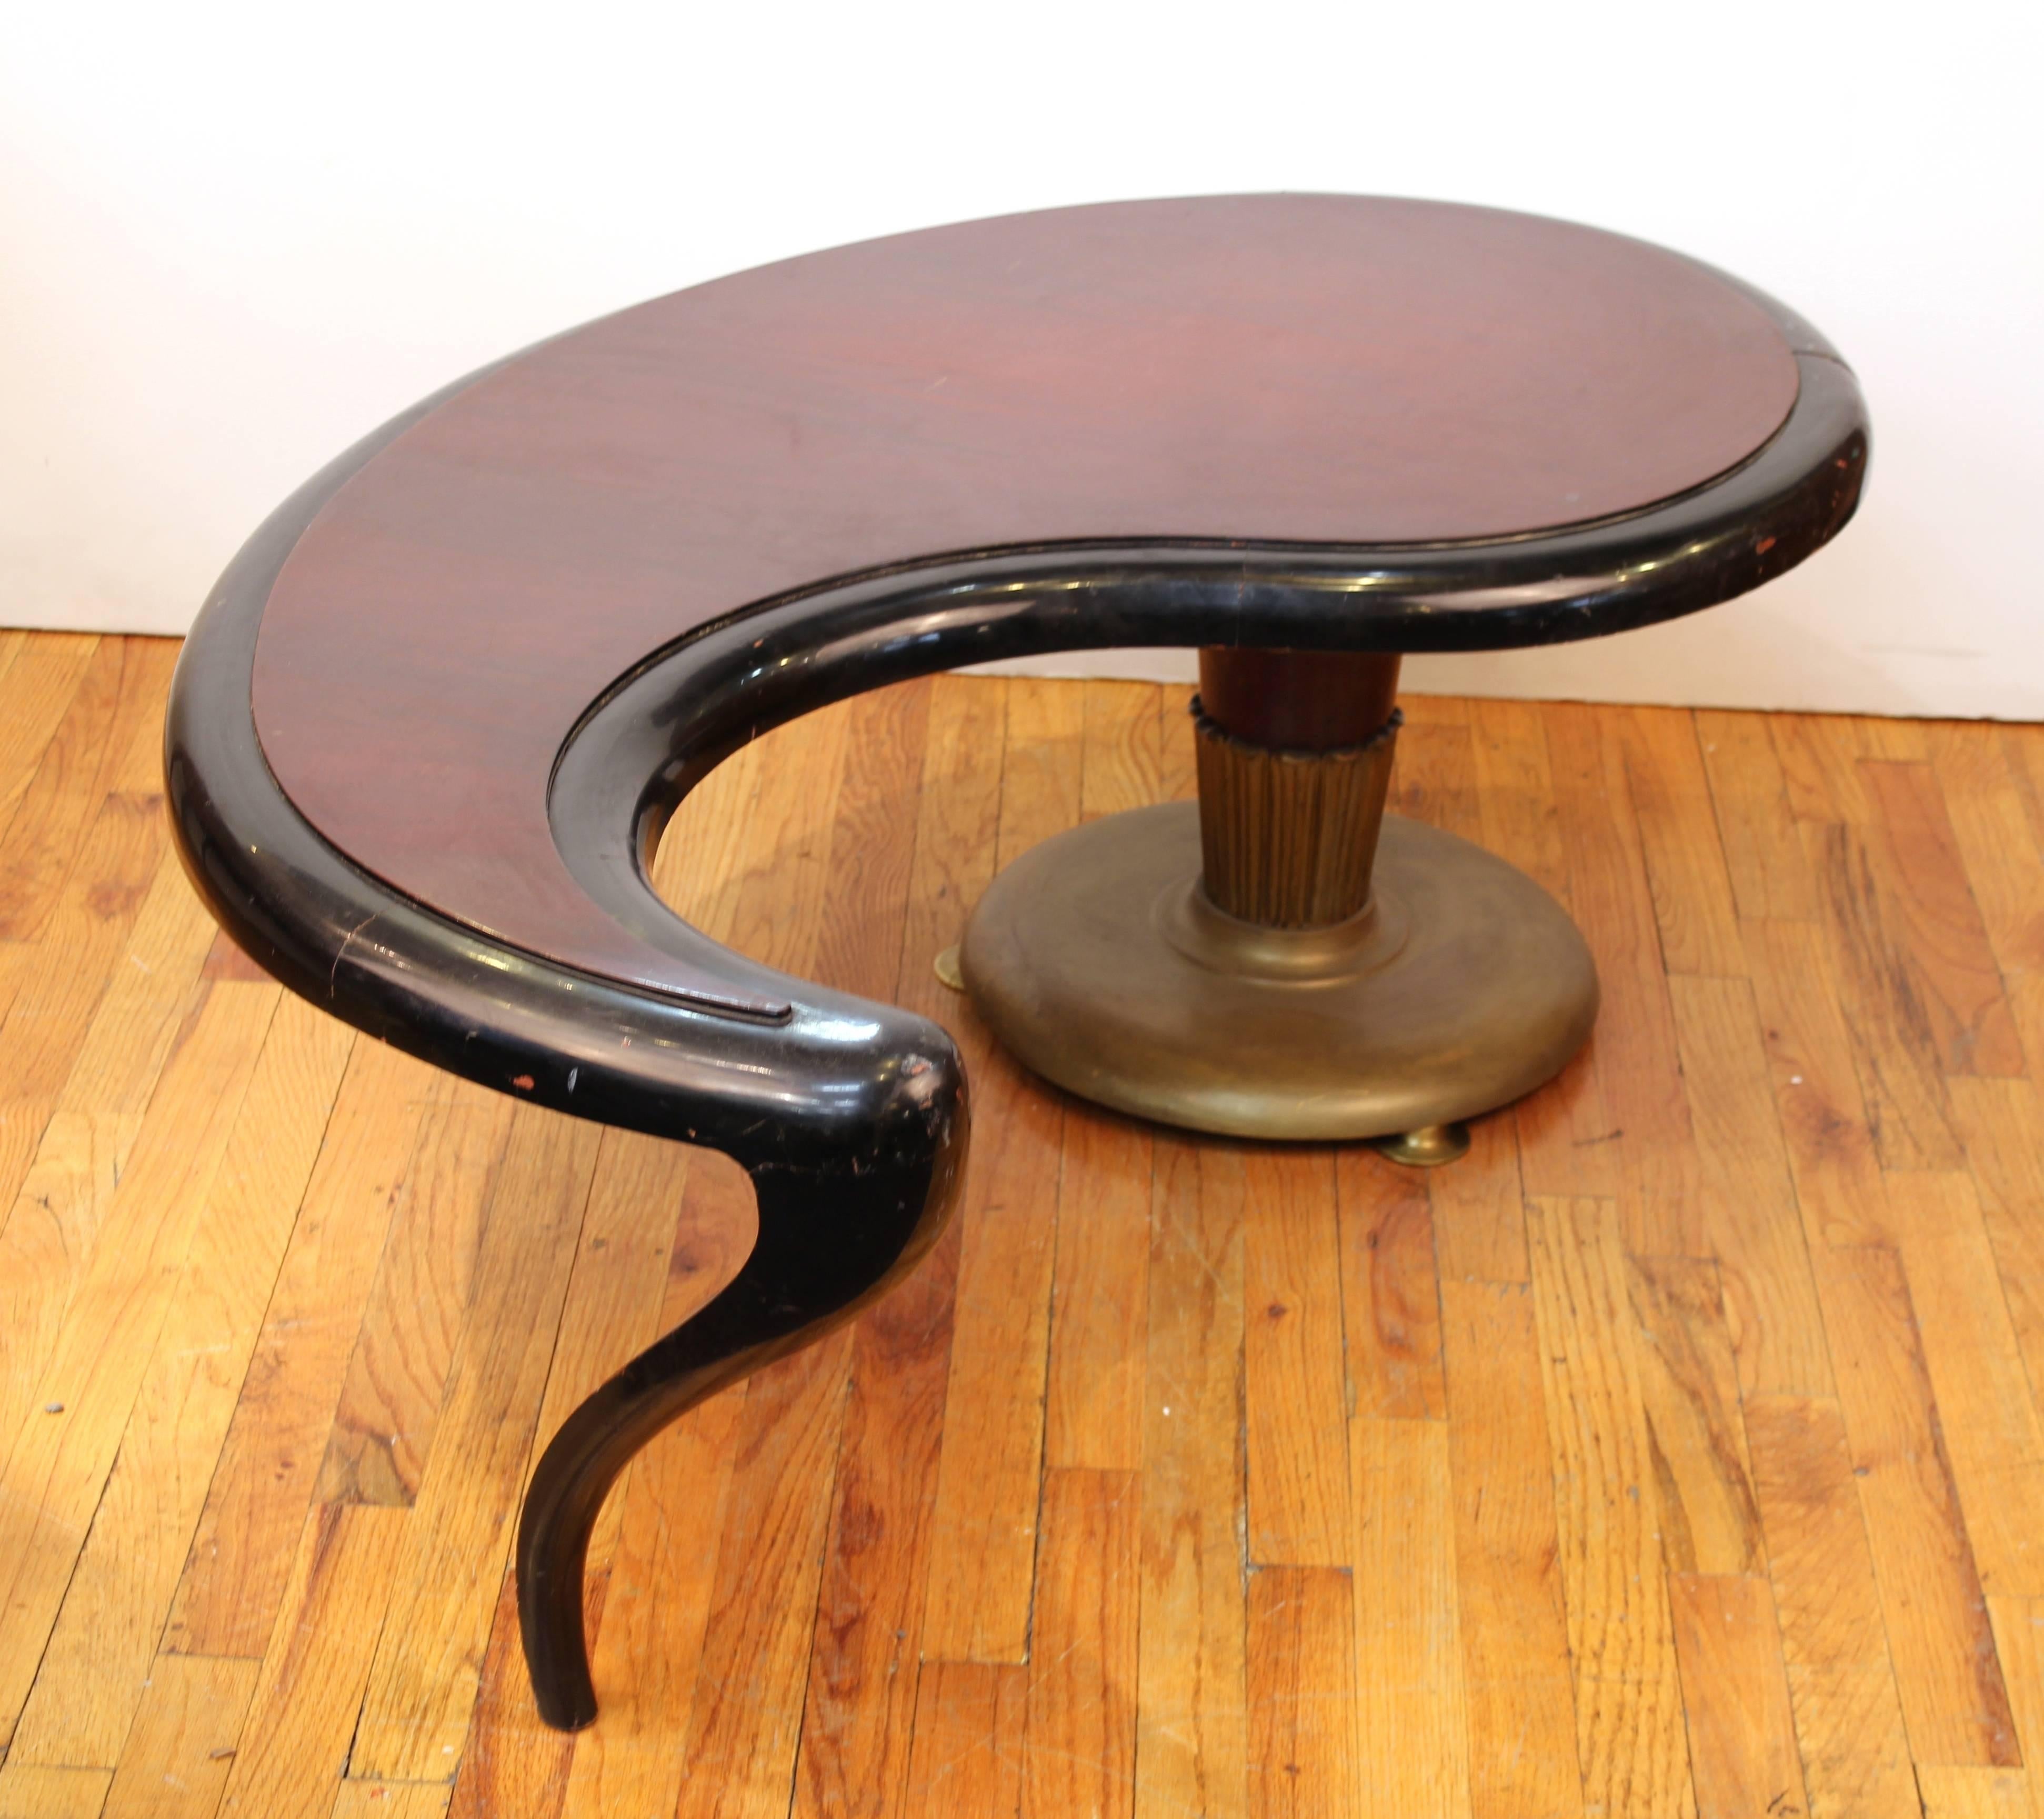 An American ebonized paisley-shaped coffee or cocktail table with one column-shaped leg and one curved leg. Produced in the 1950s by John Tavis, with triangular metal 'John Tavis Original' label on bottom. The piece is in original vintage condition